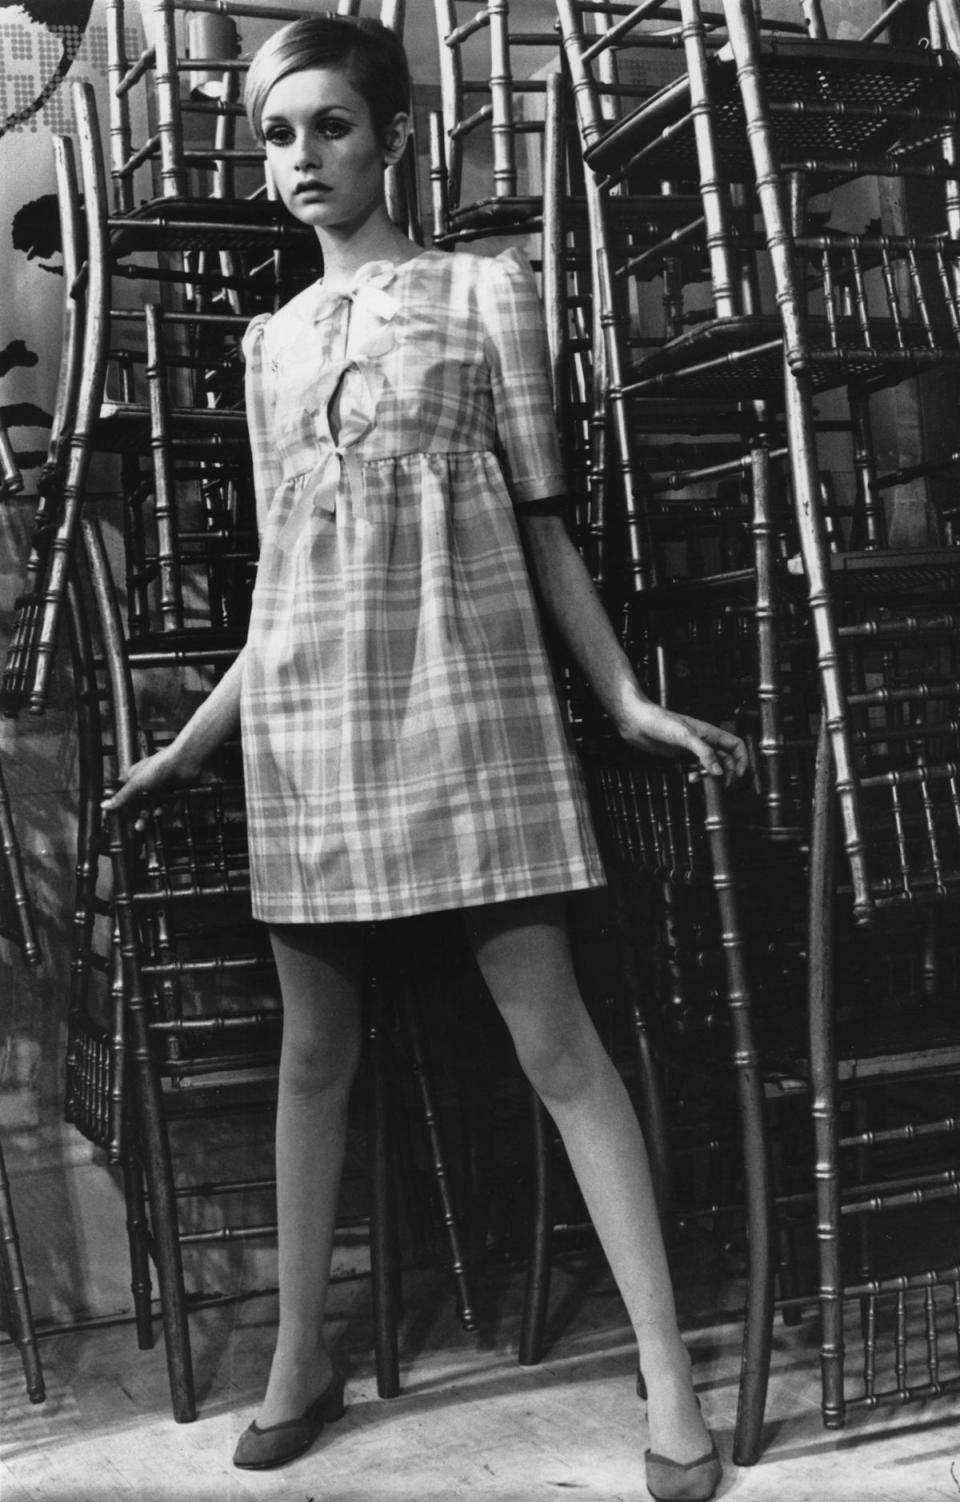 Twiggy, originally Lesley Hornby, poses in font of a stack of chairs. (Getty Images)